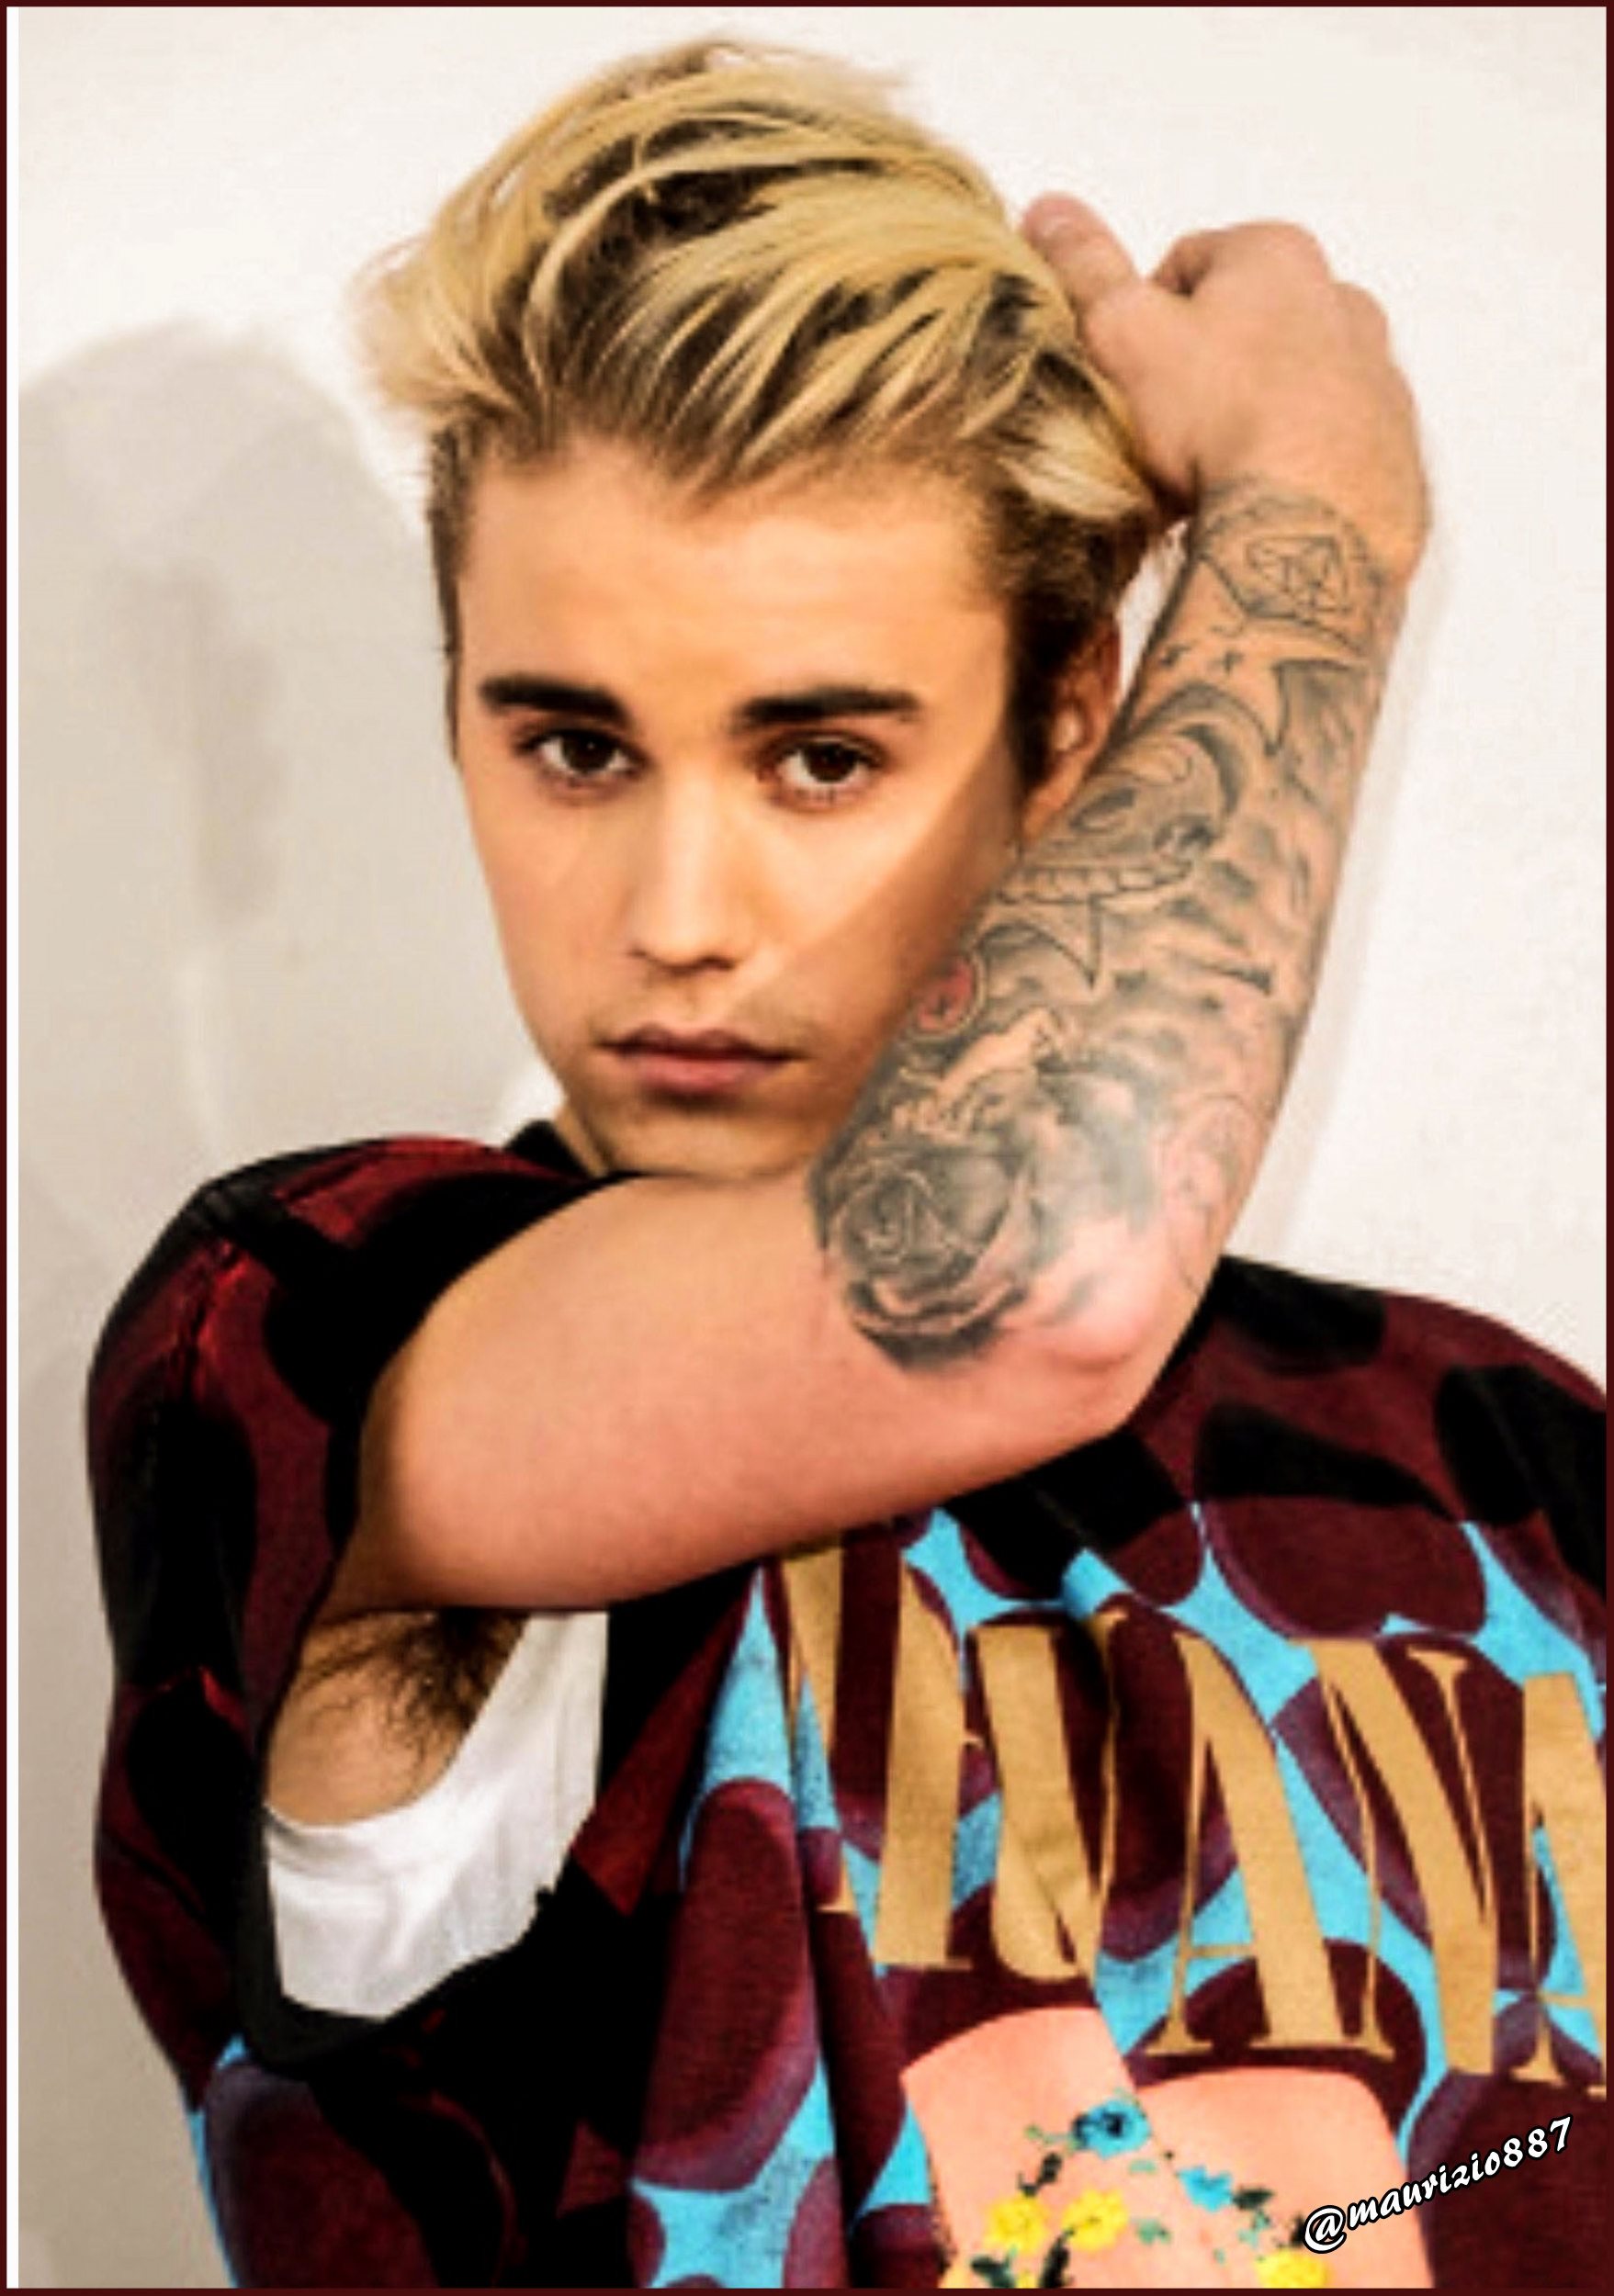 Justin bieber new songs free download 20151757 x 2500